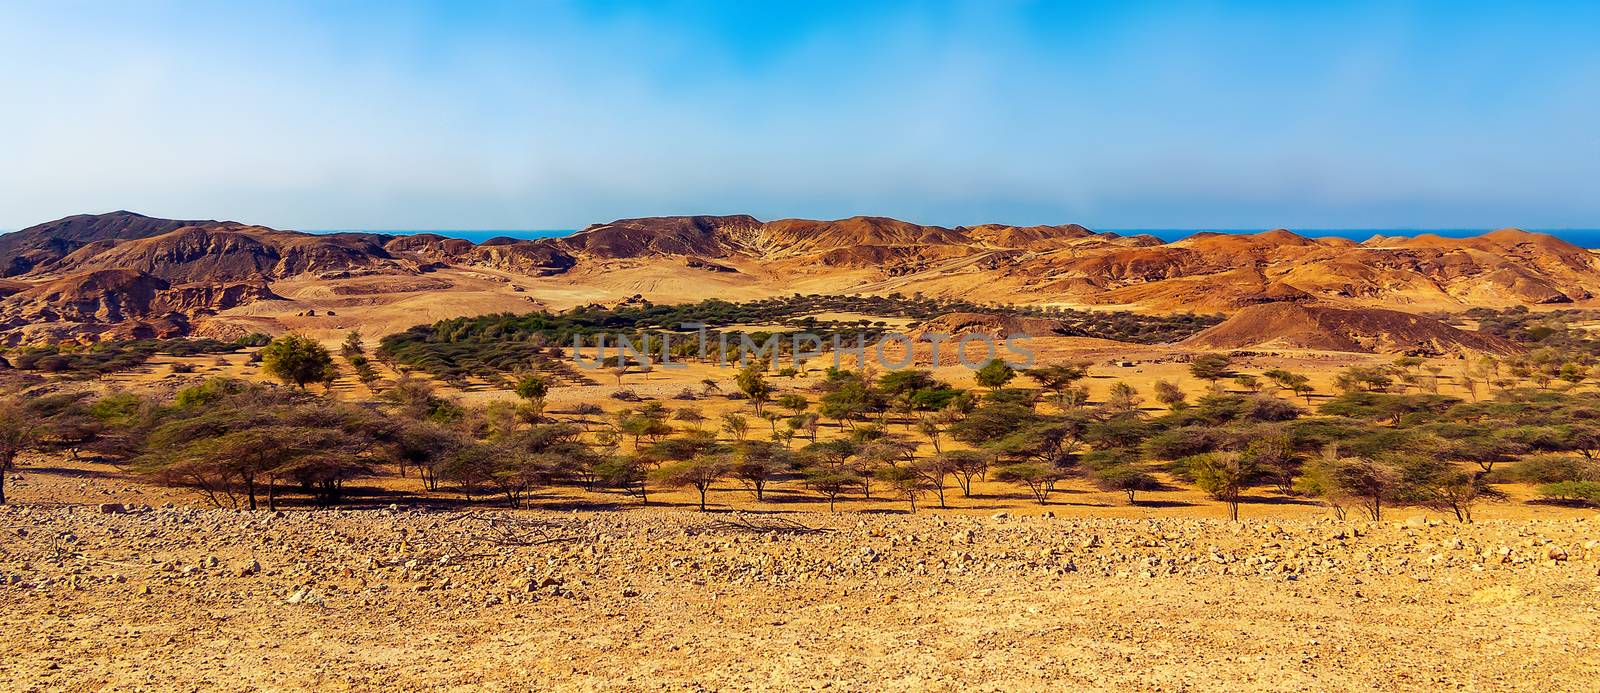 Panoramic view of the Salt Dome in the national park on the island of Sir Bani Yas, Abu Dhabi, United Arab Emirates.